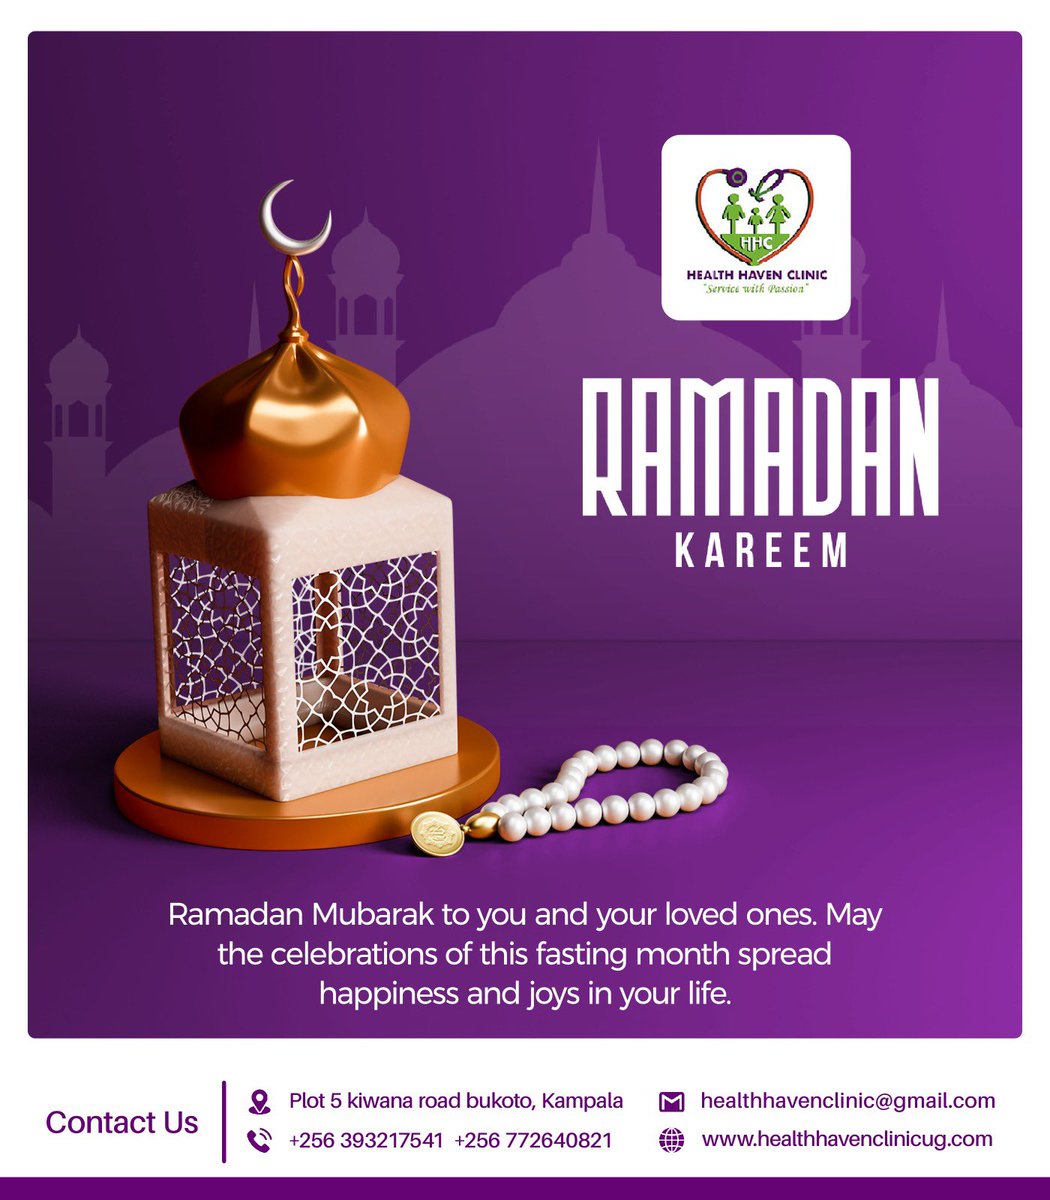 Wishing all our Muslim clients a blessed and joyful Ramadan from Health Haven Clinic! May this holy month bring you peace, prosperity, and good health. #HealthHavenClinicUg